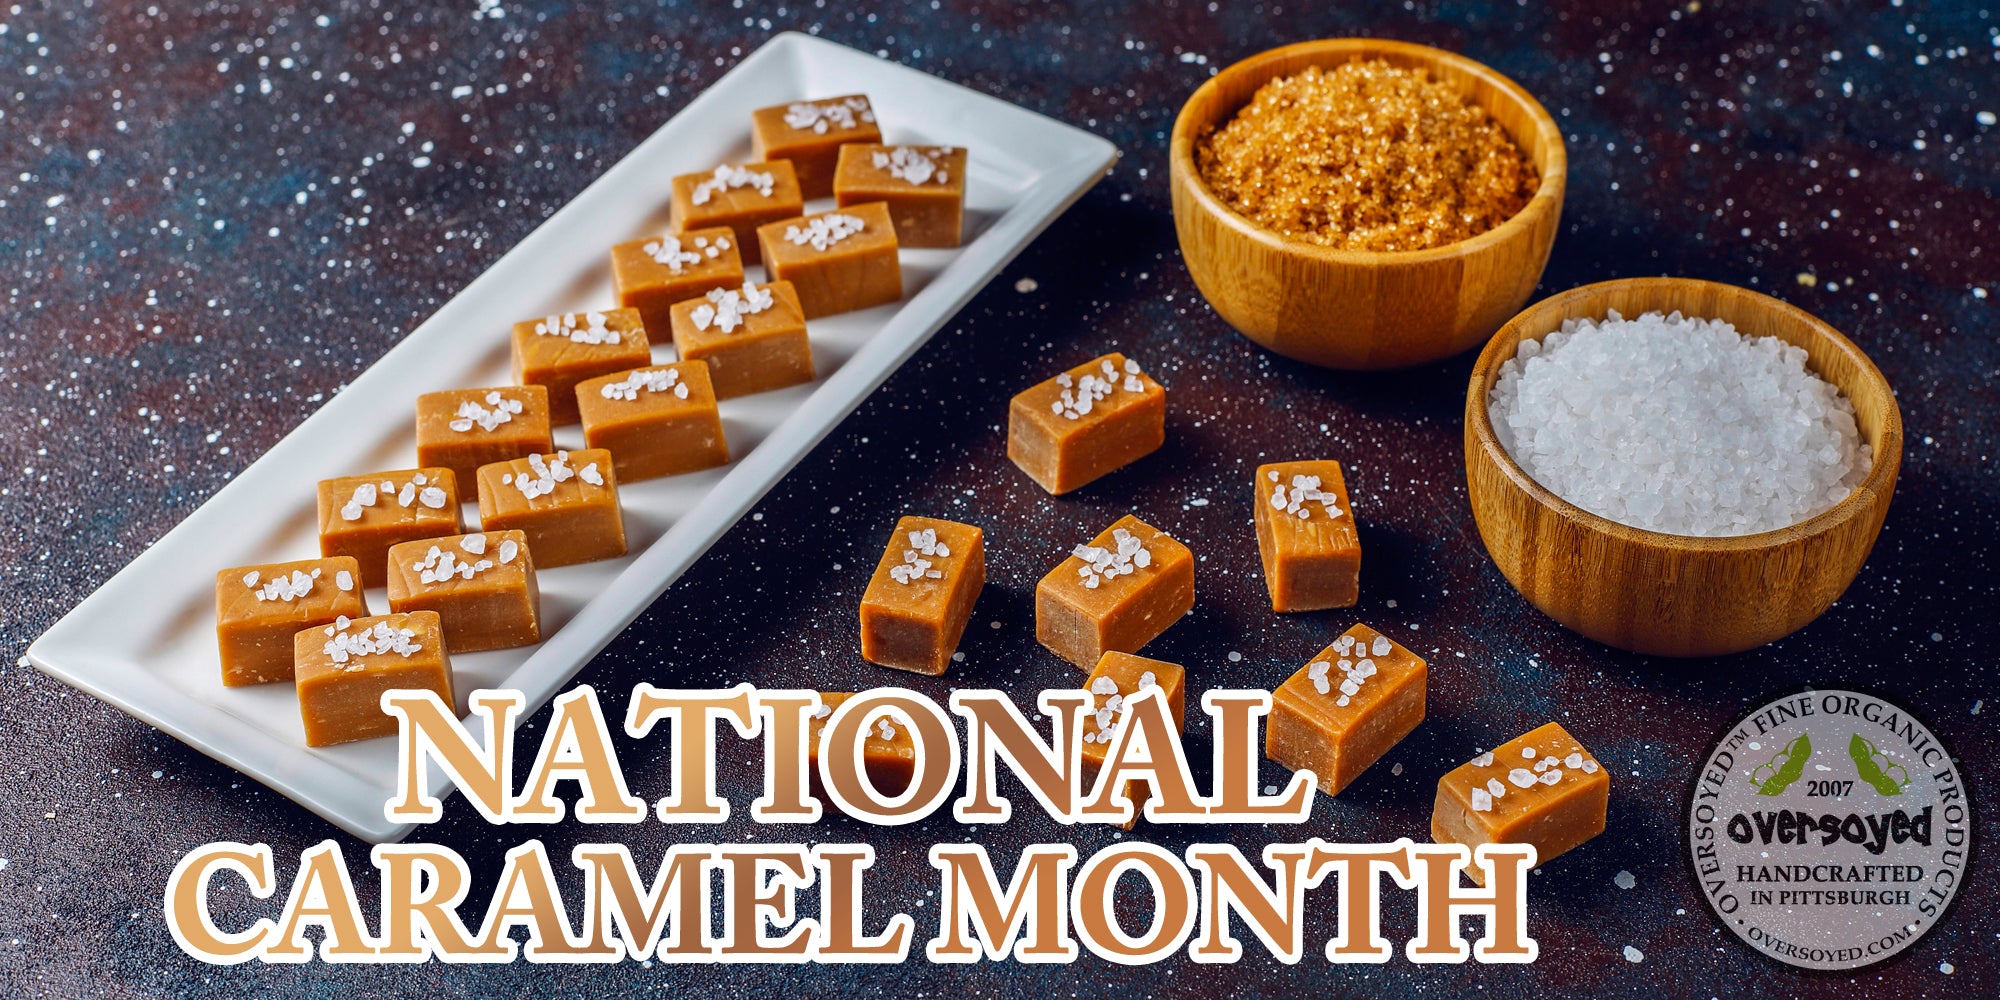 OverSoyed Fine Organic Products - National Caramel Month